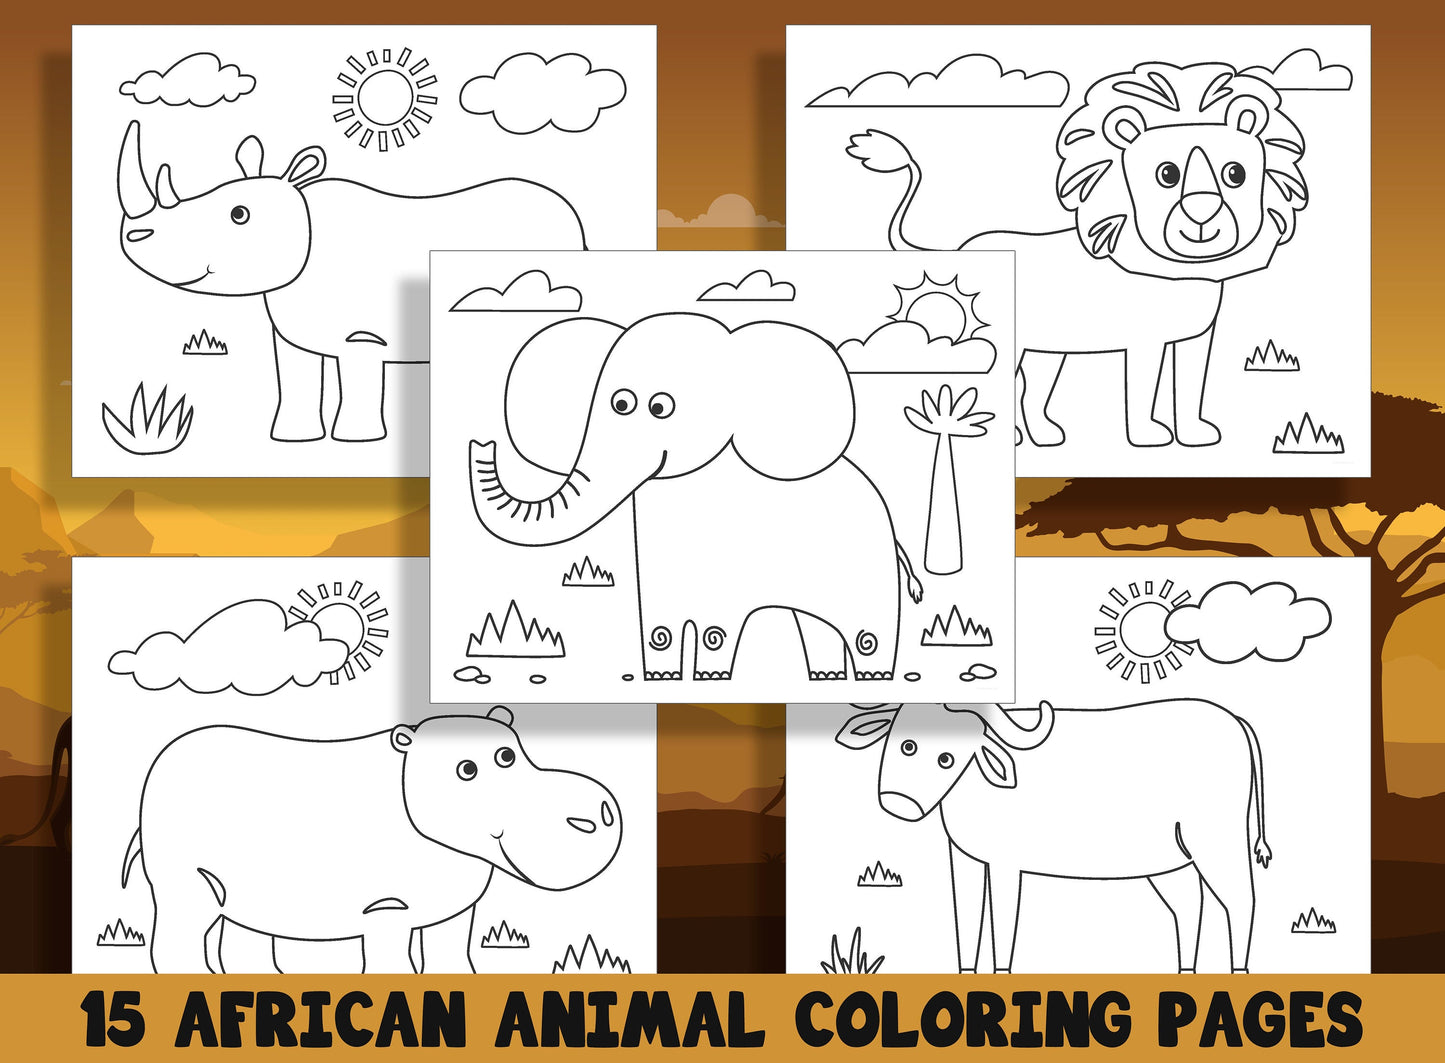 15 Fun and Educational African Animal Coloring Pages for Preschool and Kindergarten Kids, PDF File, Instant Download